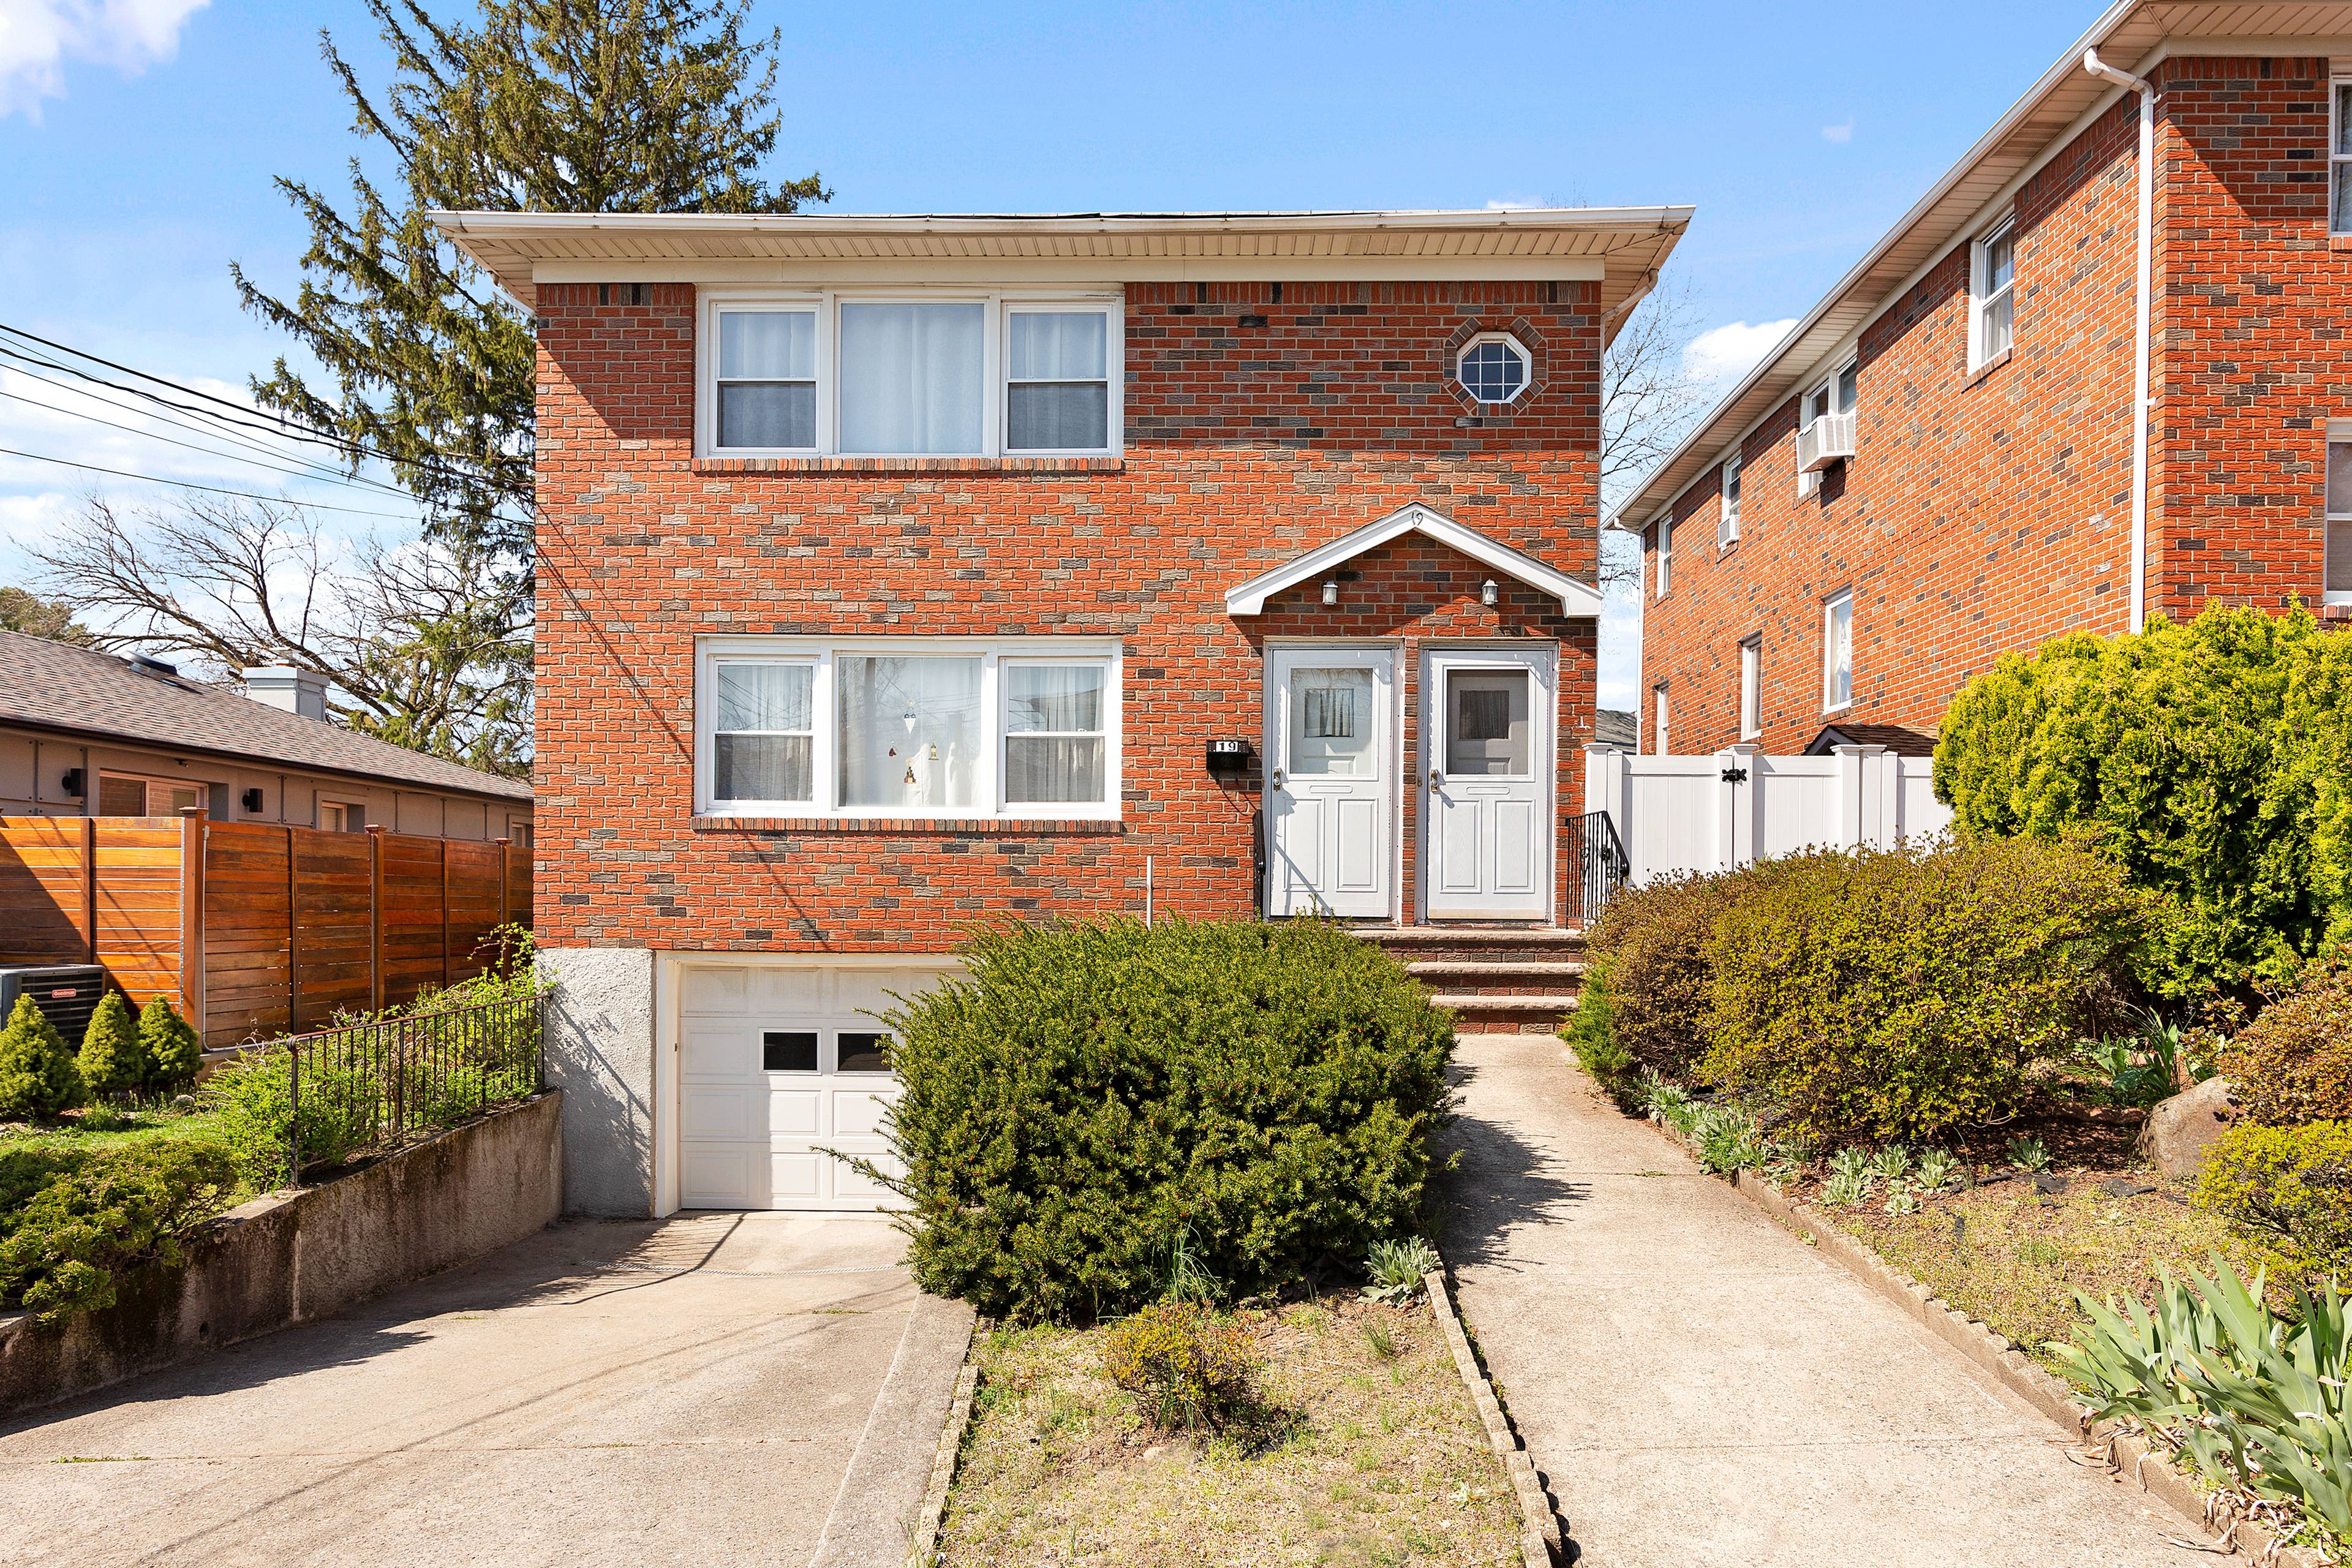 COMING SOON ! Make beautiful Sunnyside your home with this all brick two family home.